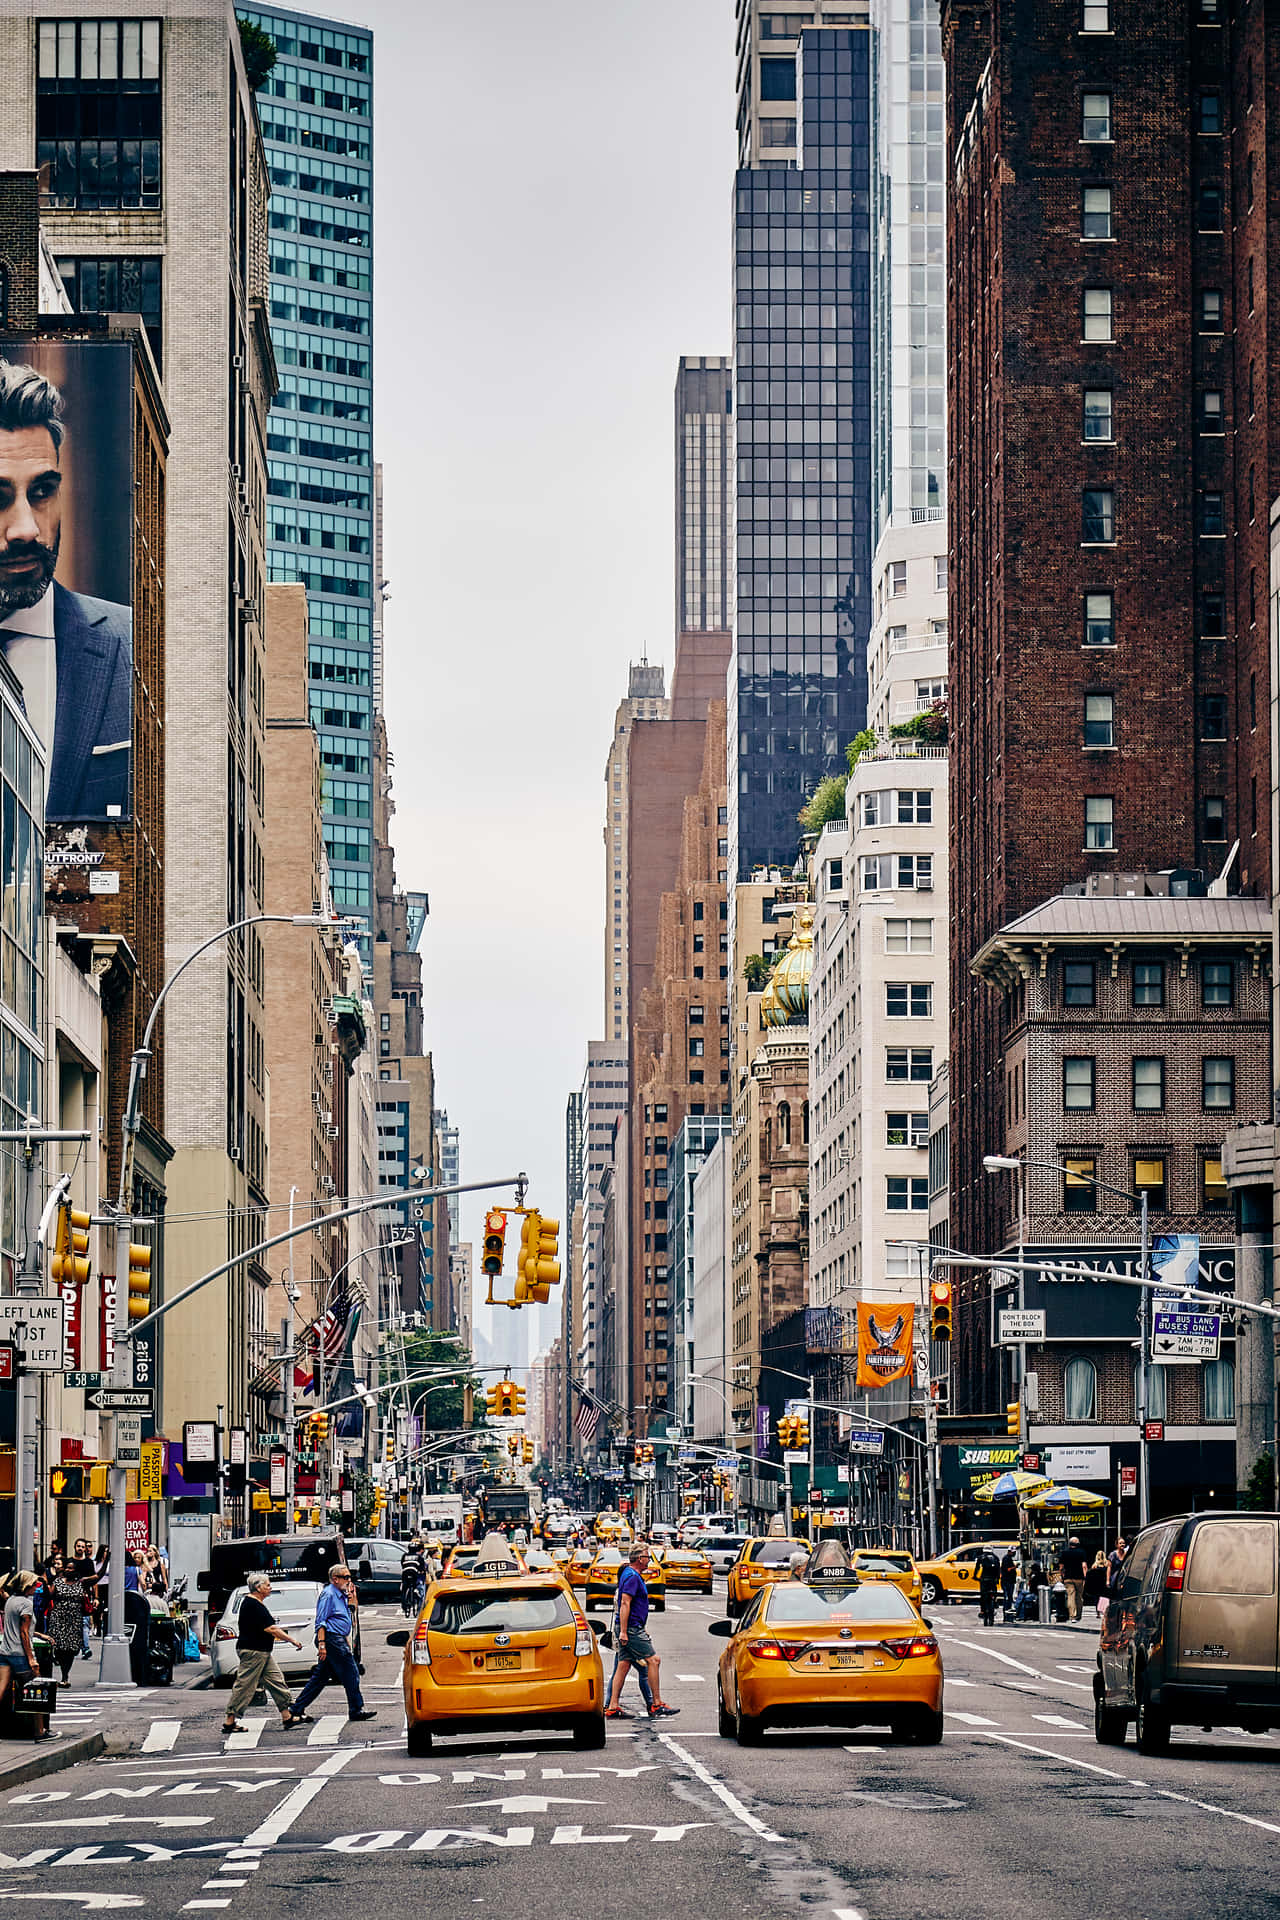 Experience the vibrancy of New York's colorful and creative art scene Wallpaper